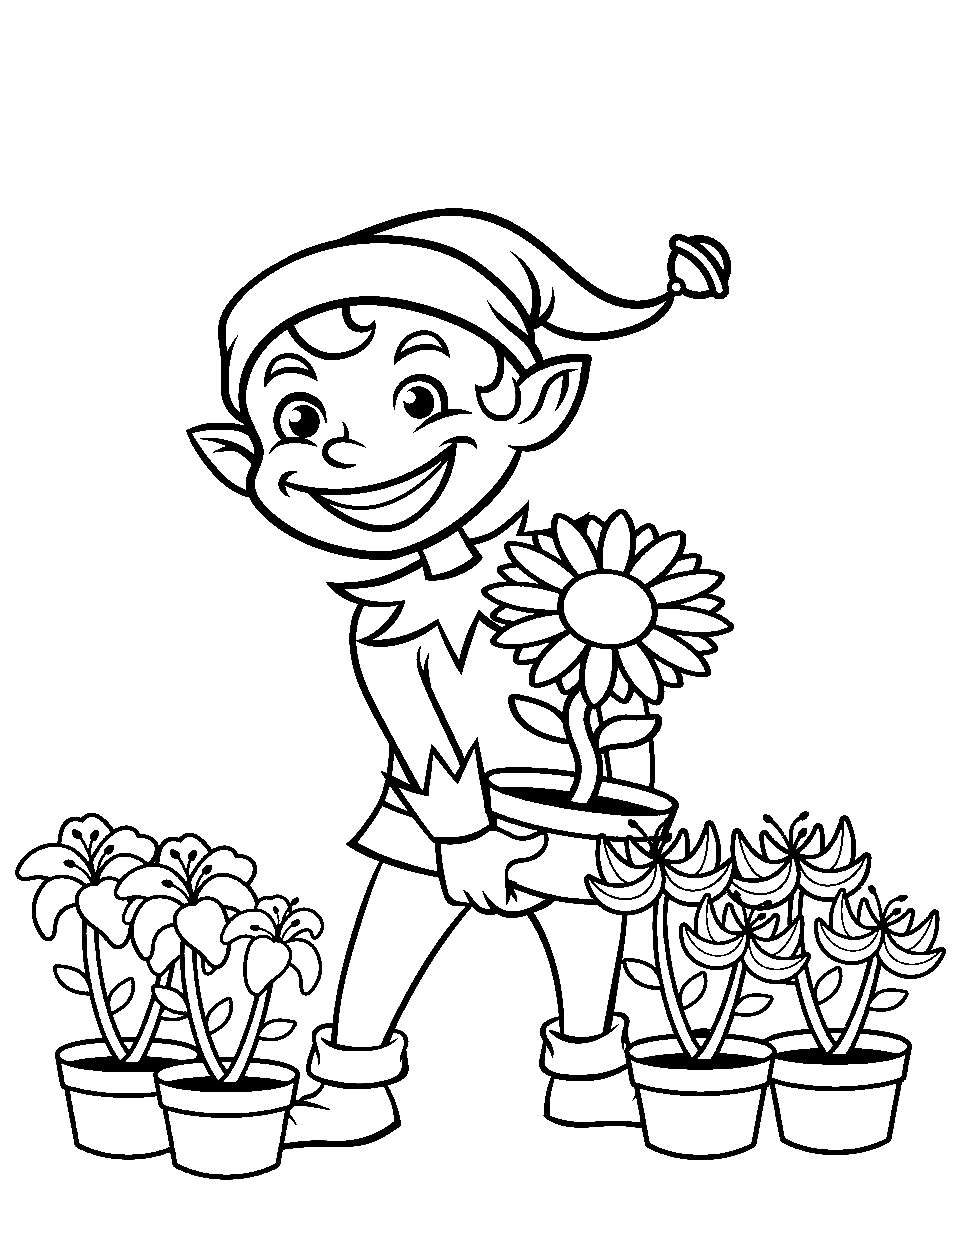 Elf Gardener Tending Plants Coloring Page - An elf caring for exotic, flowering plants.